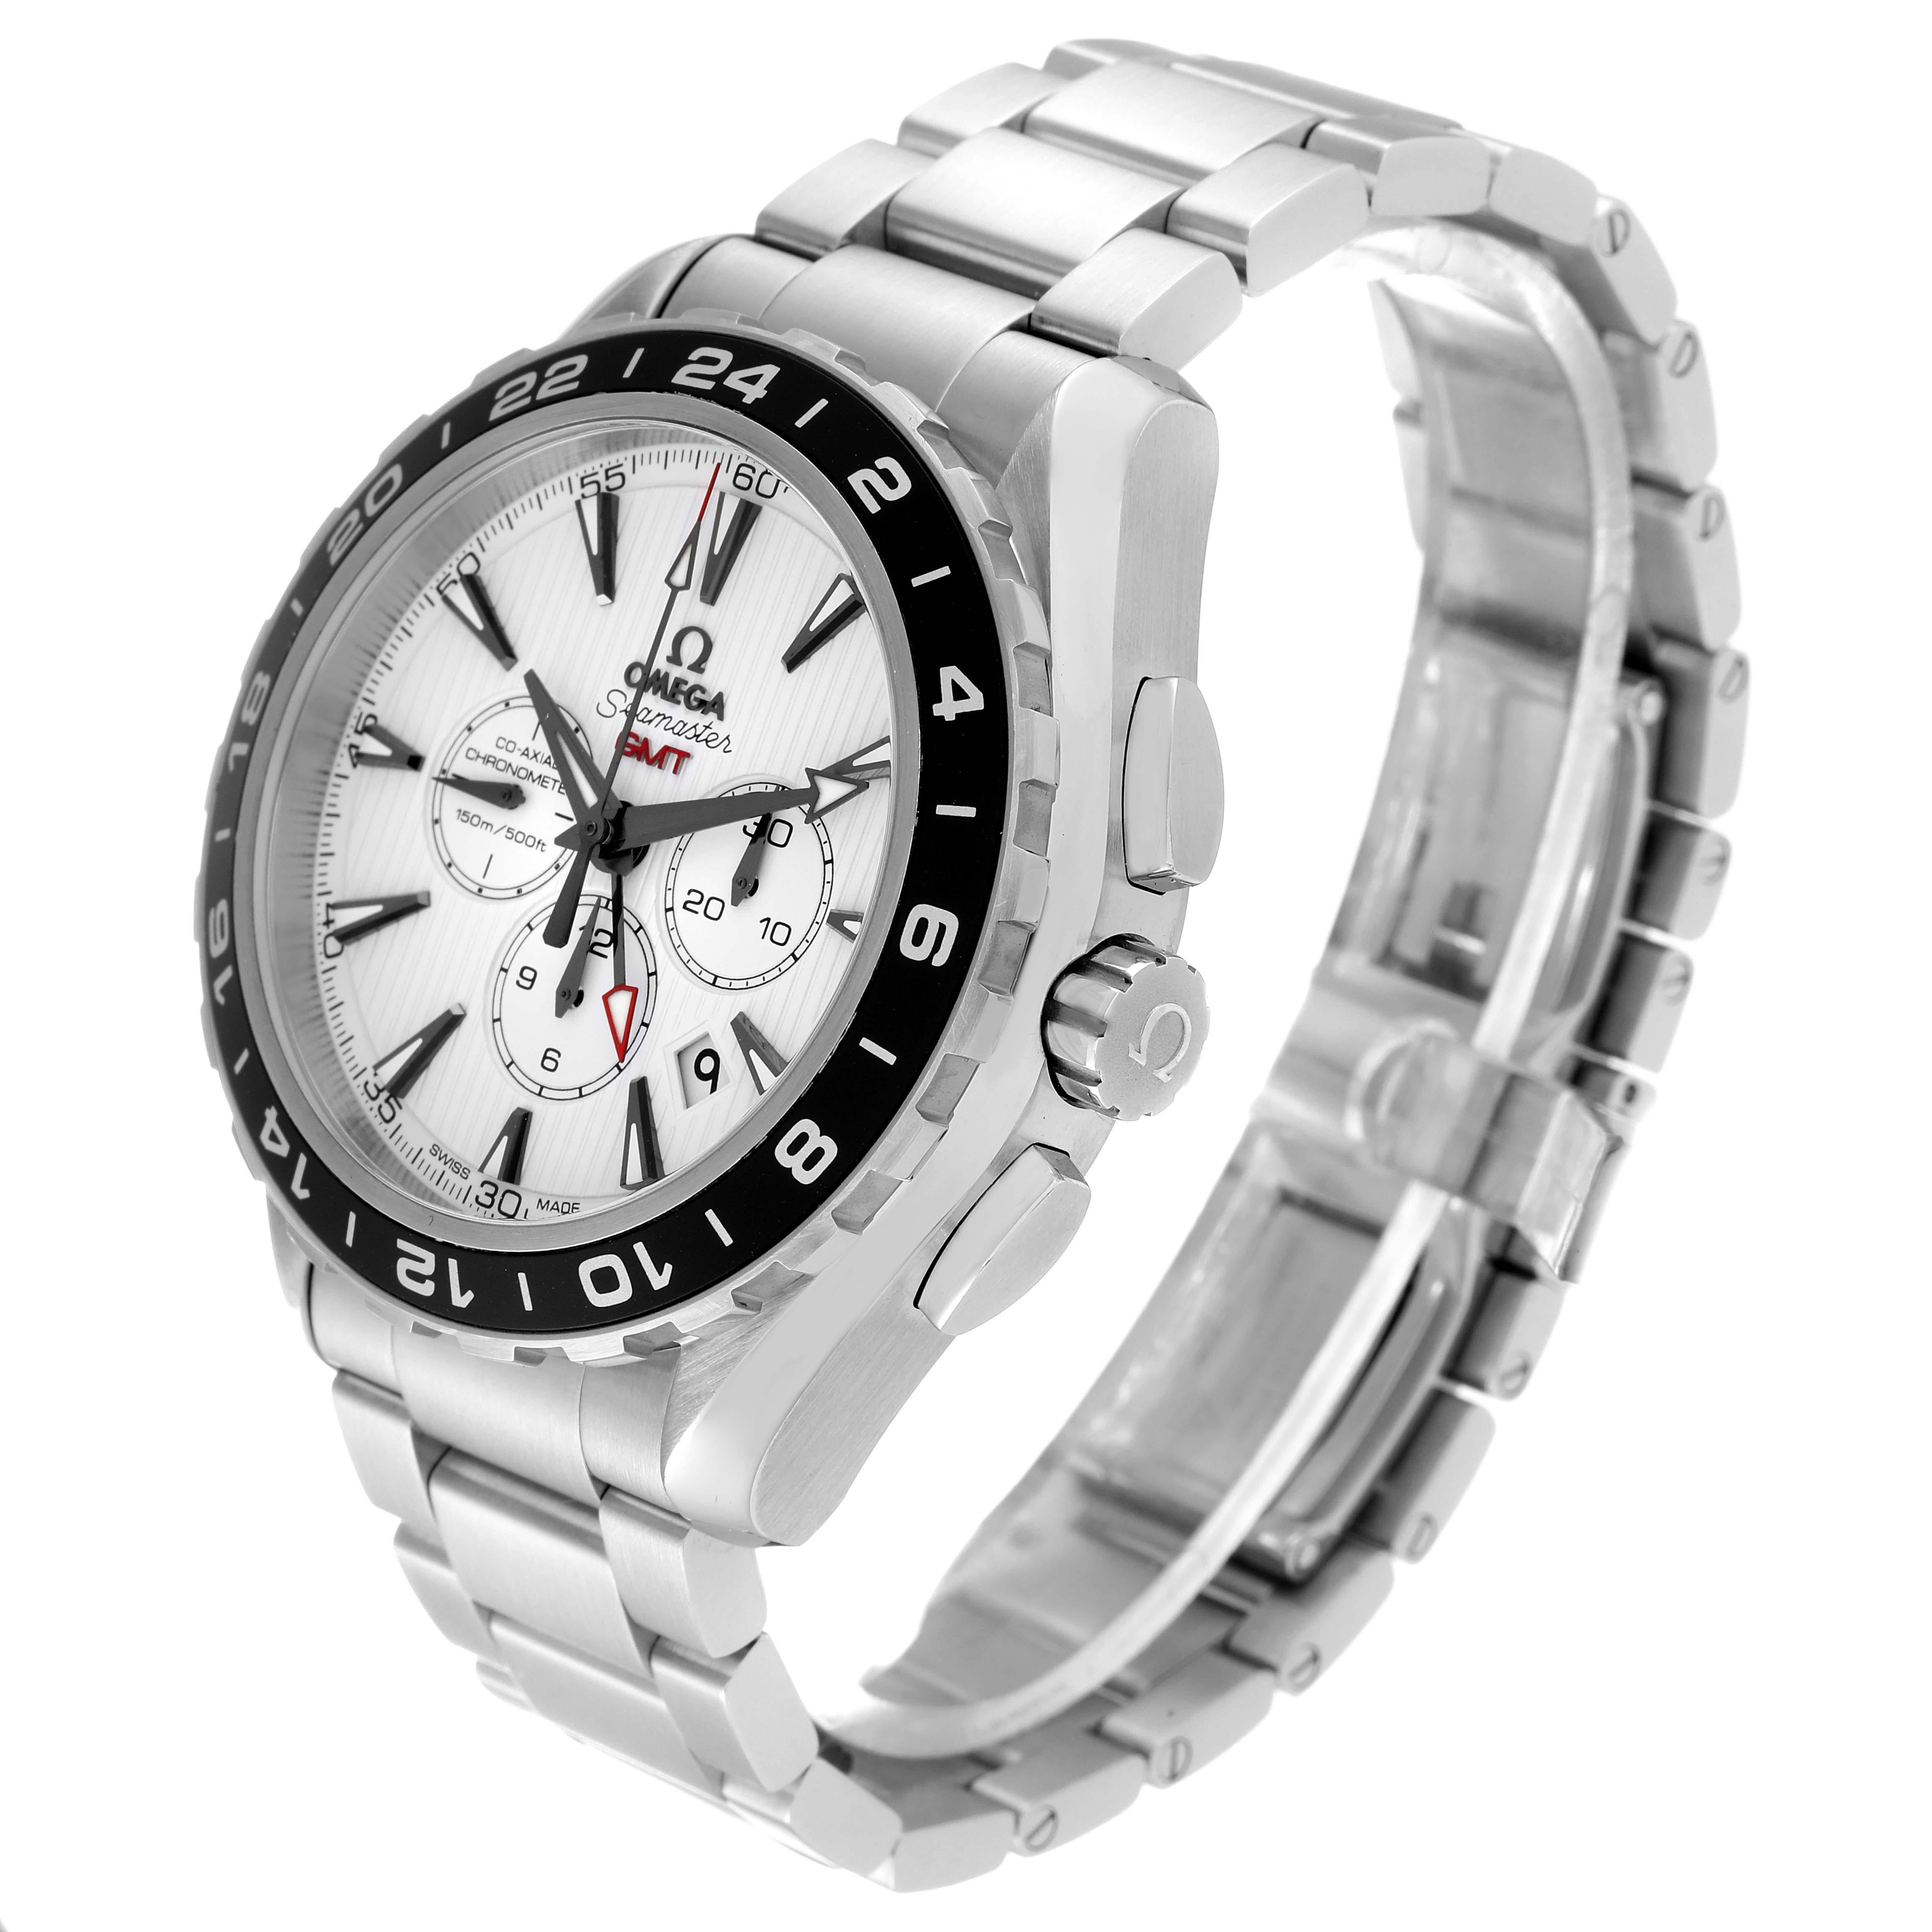 Men's Omega Seamaster GMT Chronograph Steel Mens Watch 231.10.44.52.04.001 Card